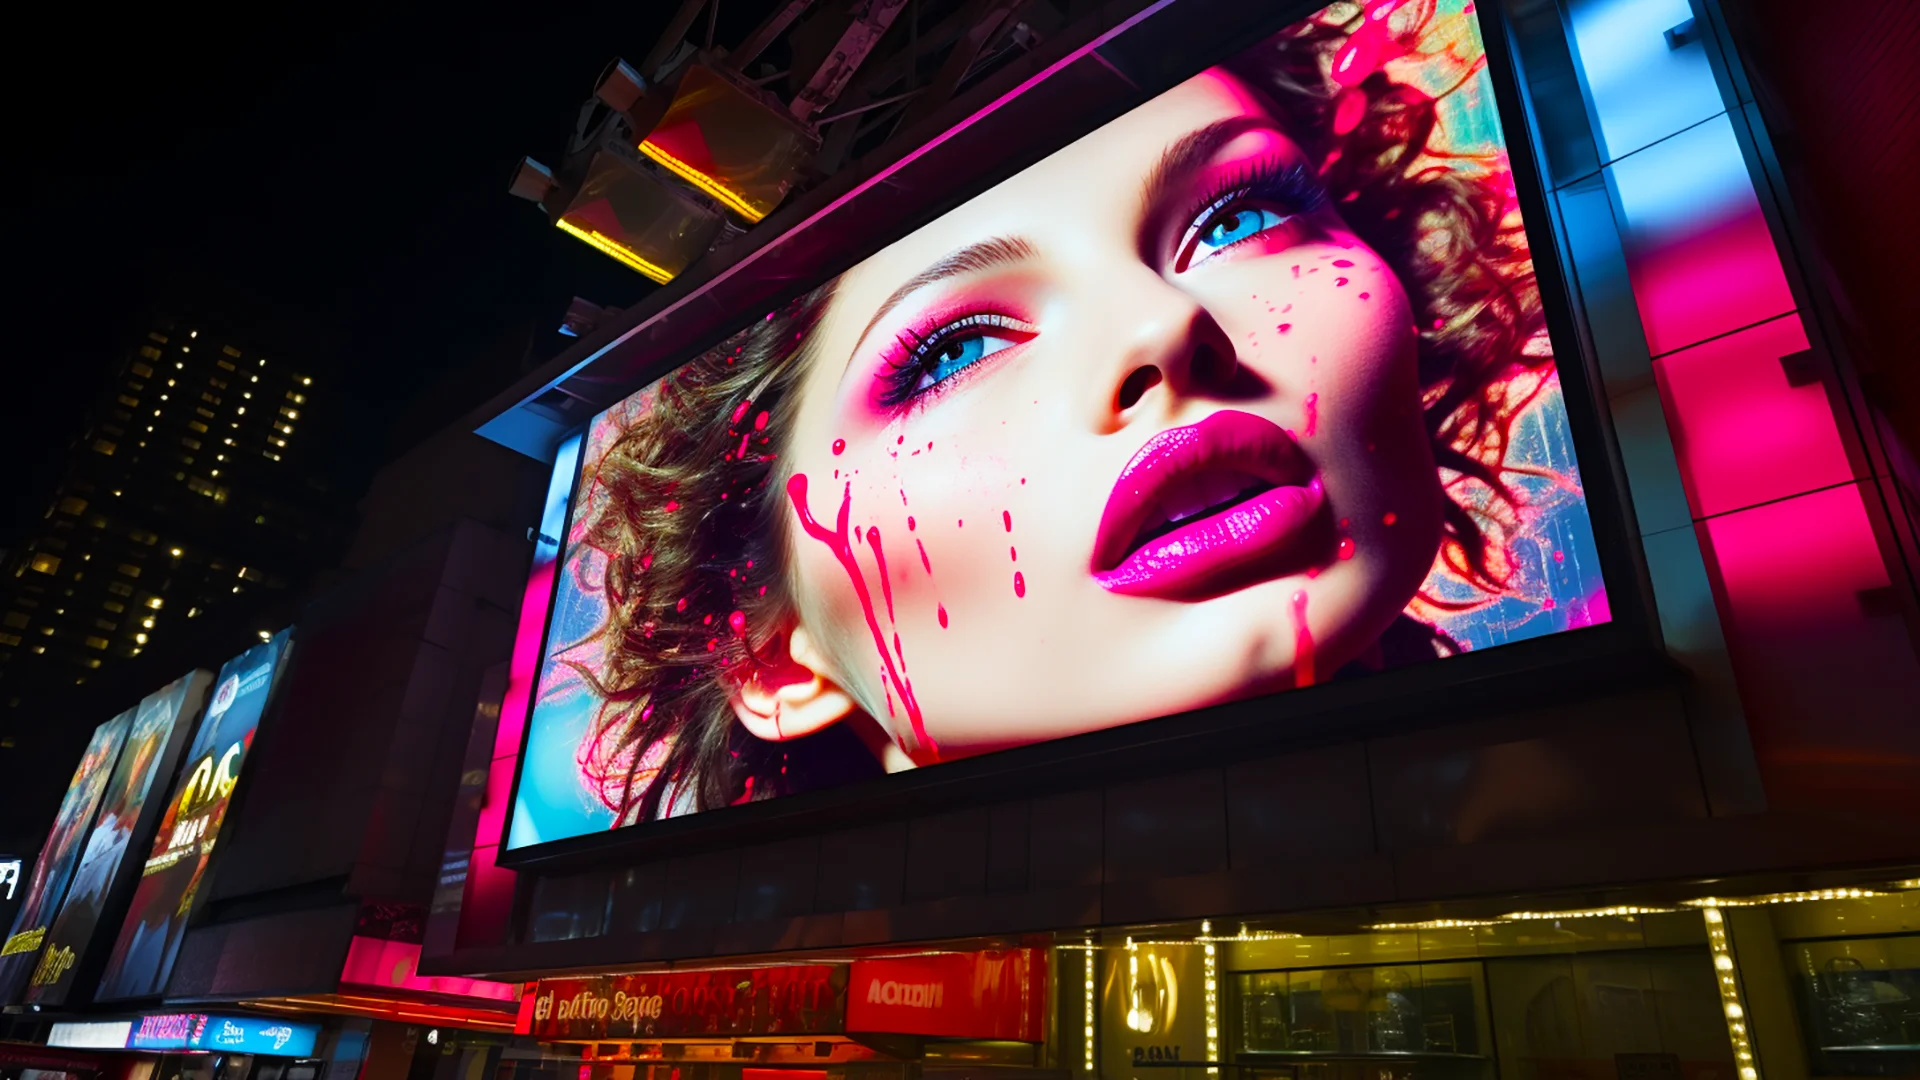 Beautiful female with vibrant make-up on a city advertising billboard - Montus - Services - Advertising, PPC and Campaigns​ - Image #01